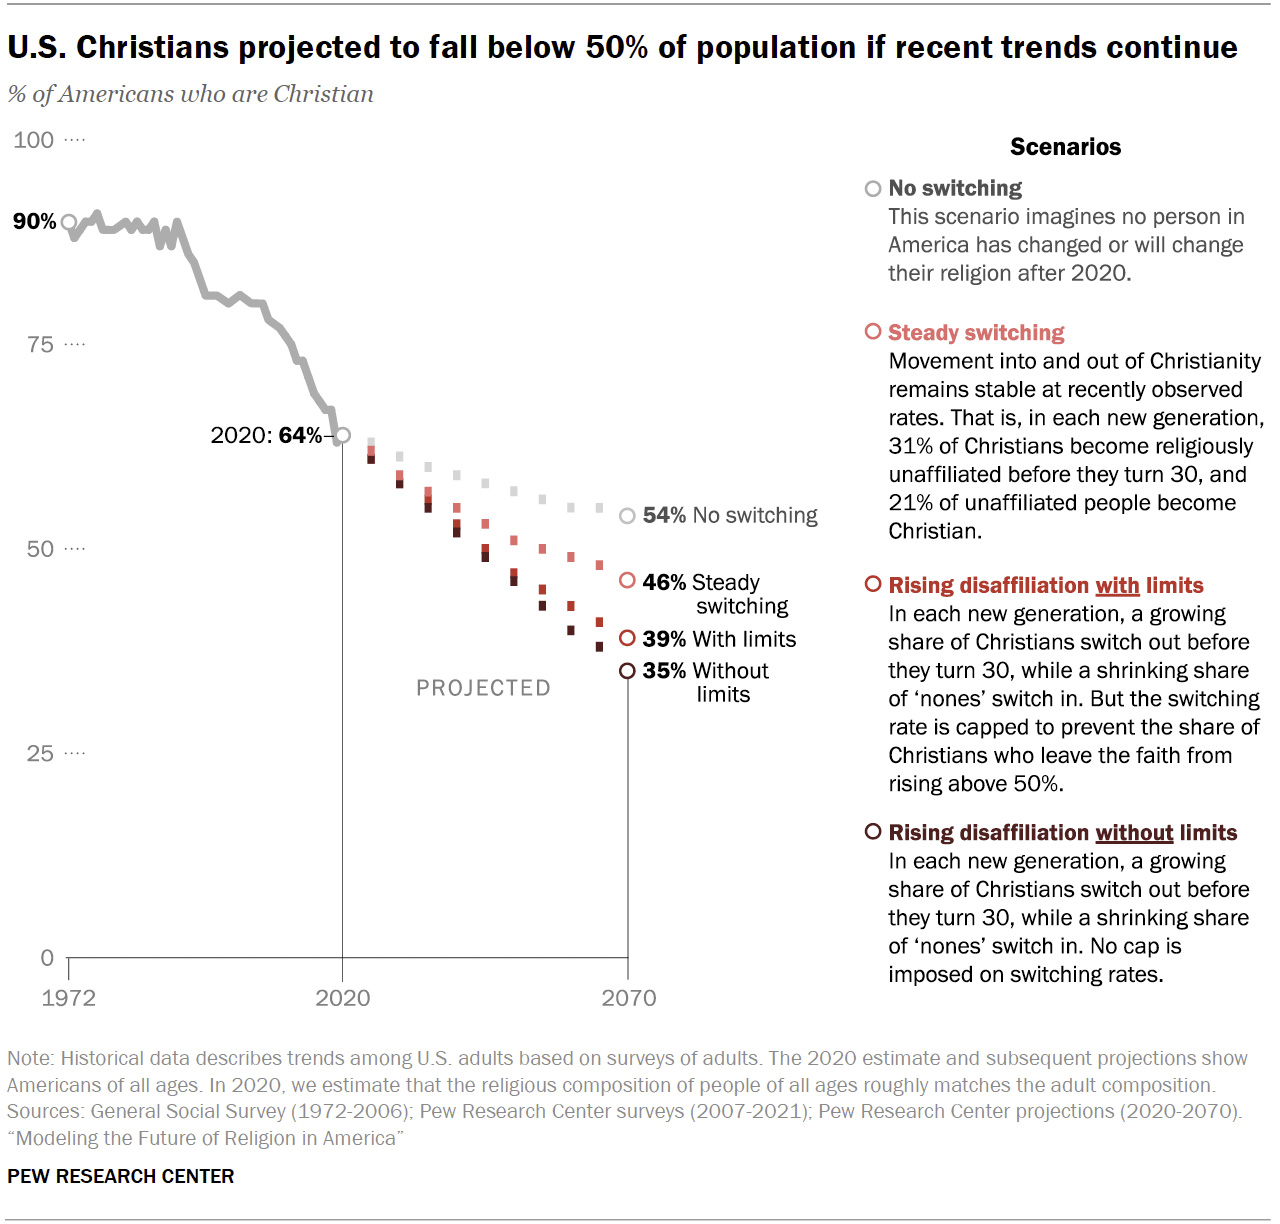 "U.S. Christians projected to fall below 50% of population if recent trends continue" Graphic courtesy of Pew Research Center